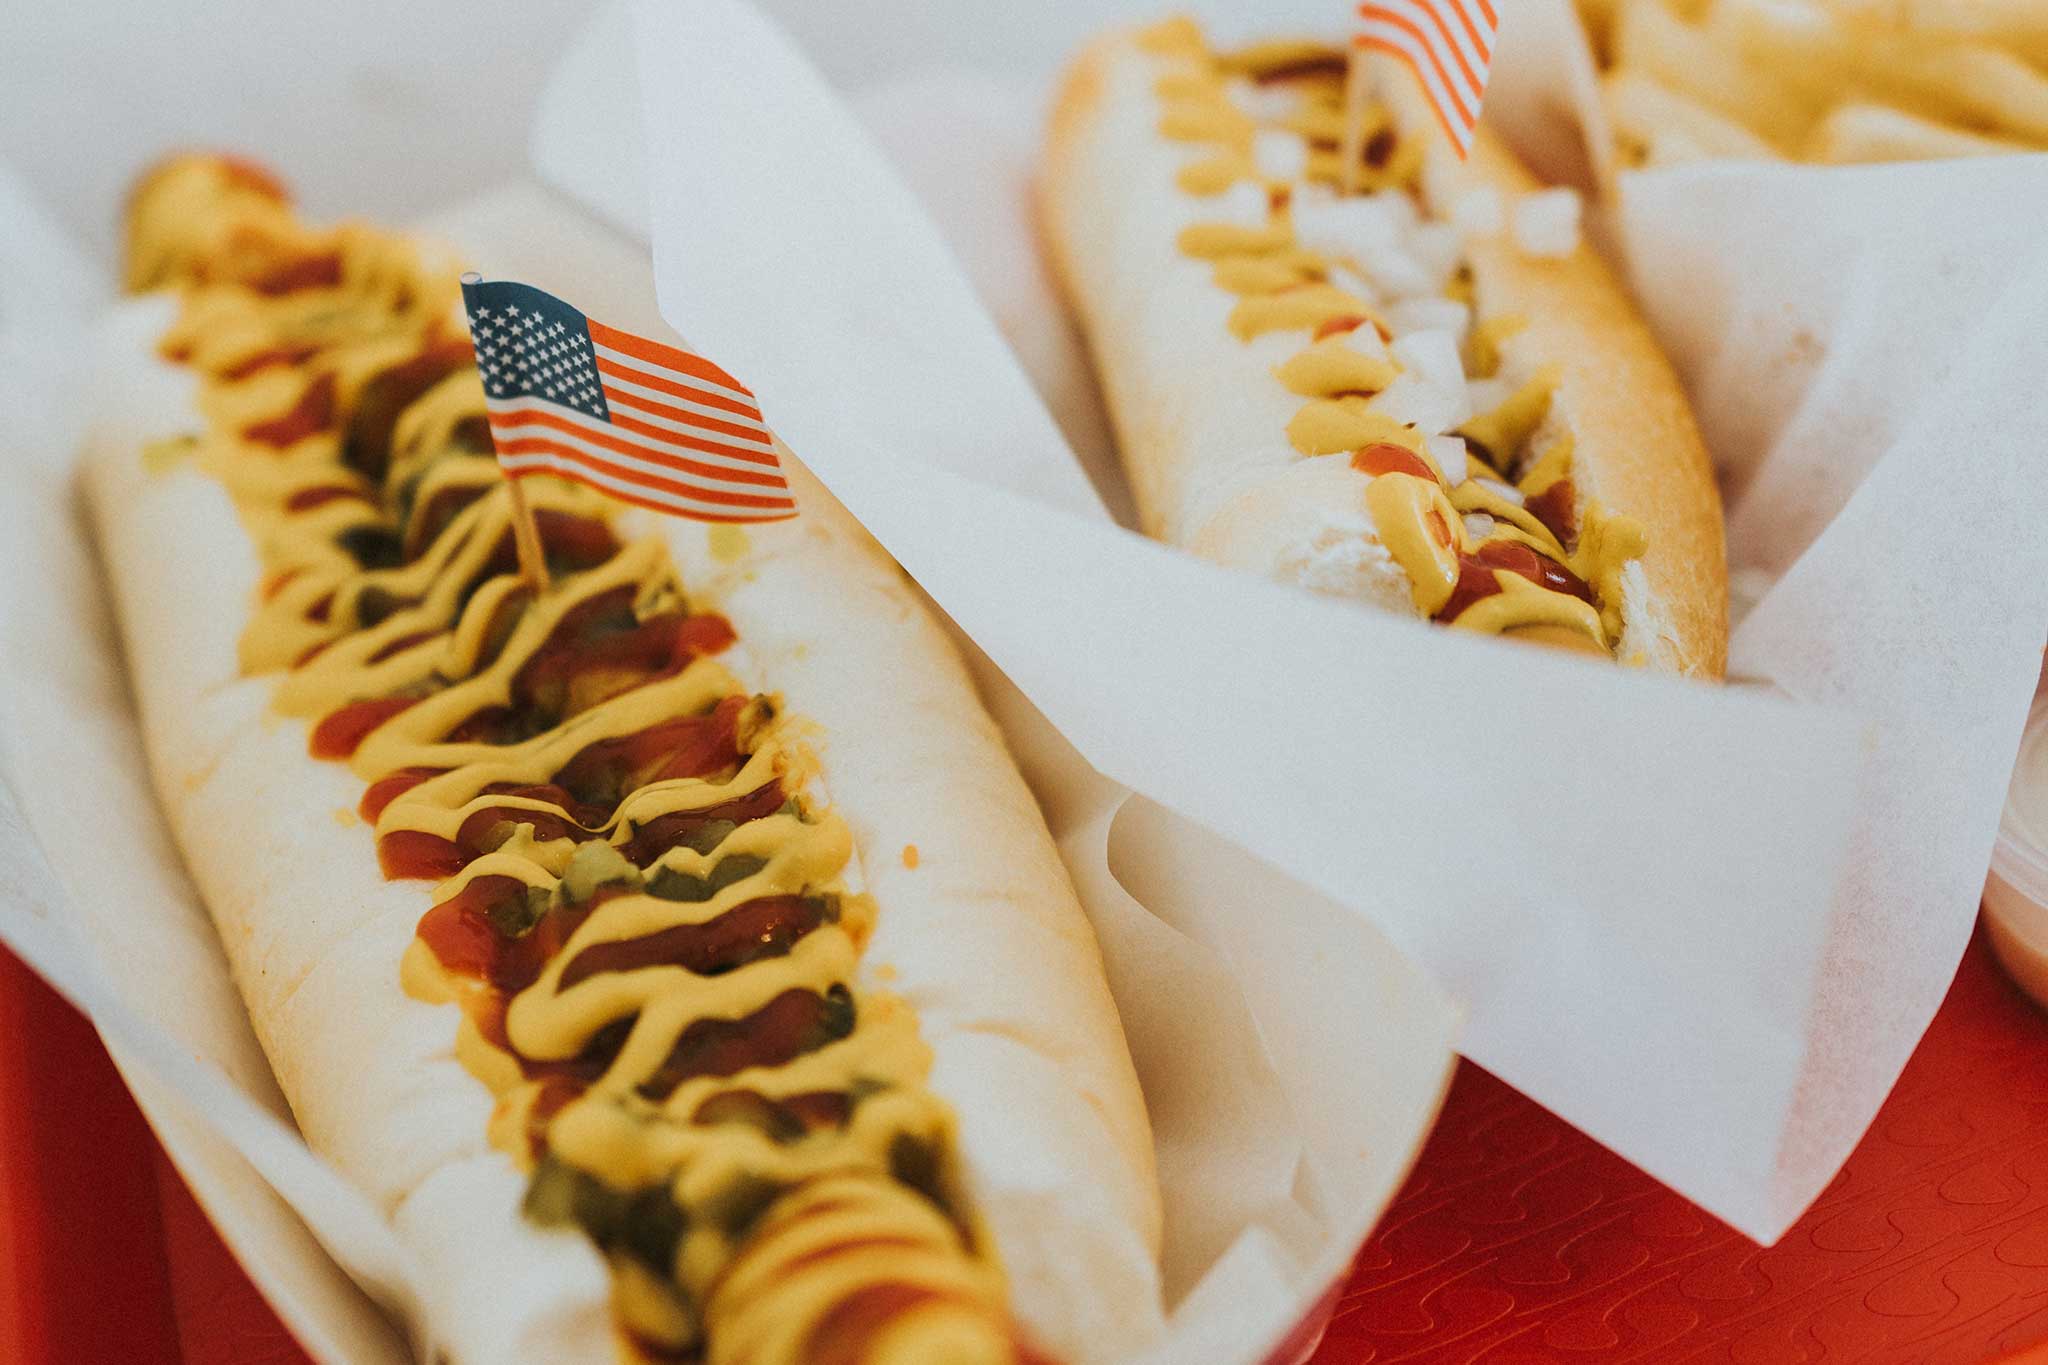 All-star American July 4th hot dogs